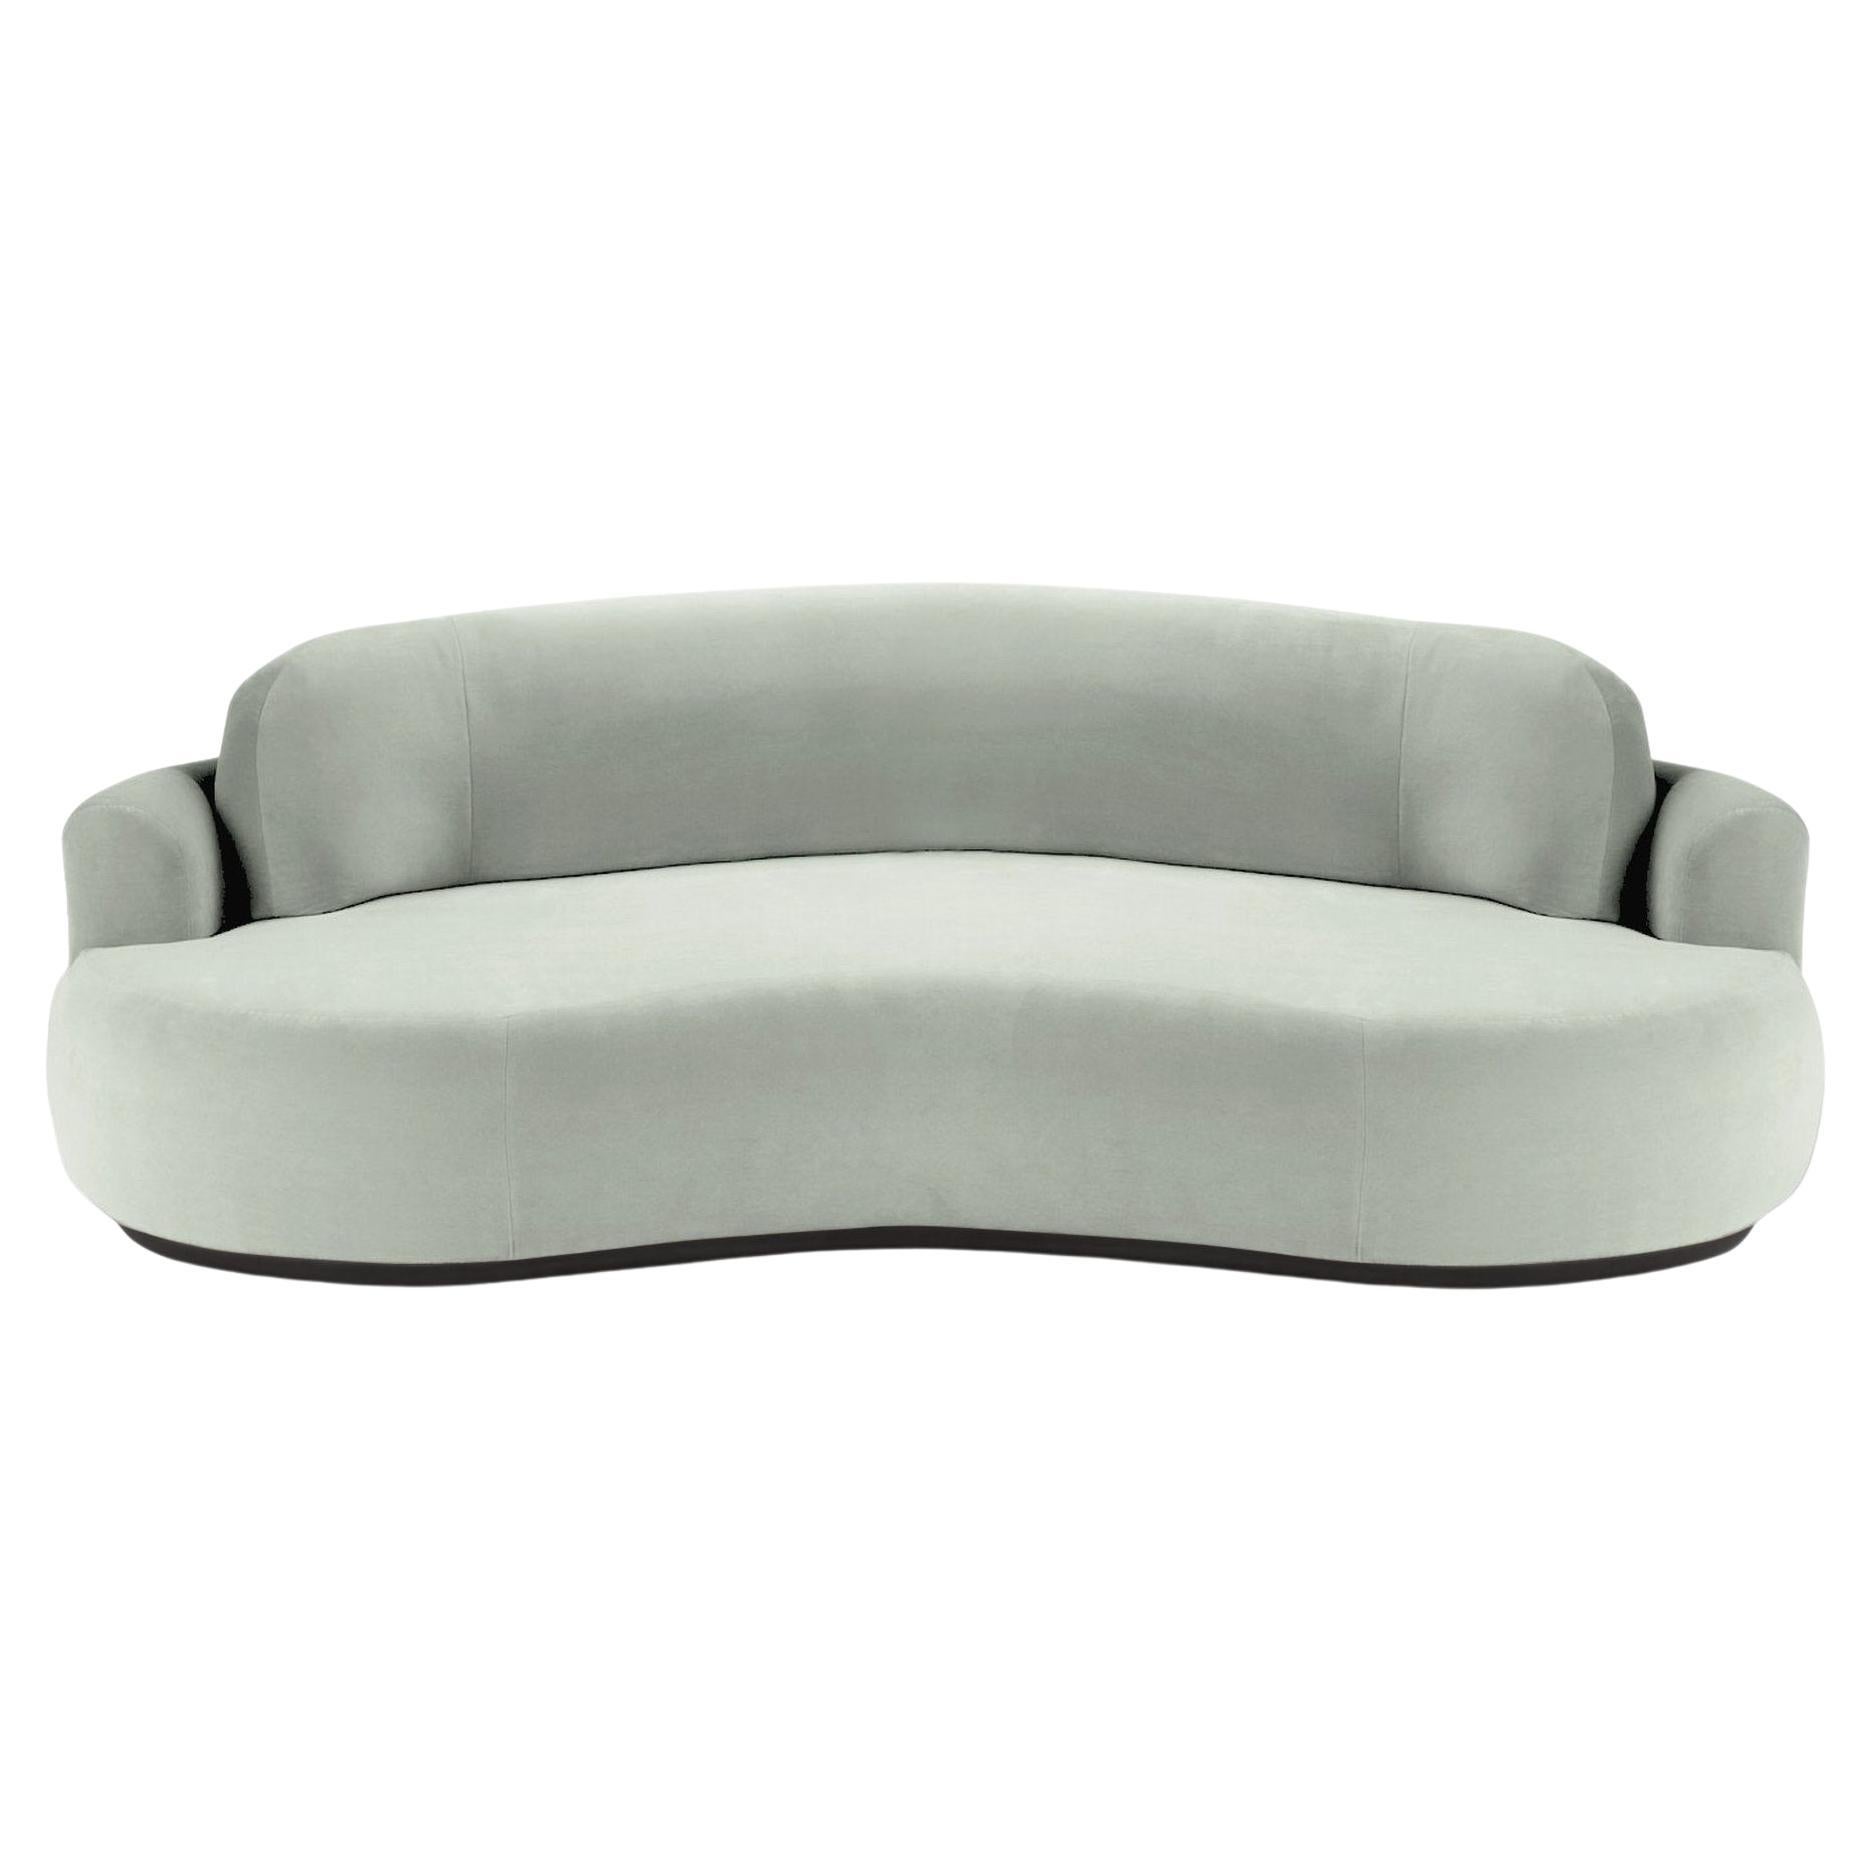 Naked Round Sofa, Medium with Beech Ash-056-5 and Smooth 60